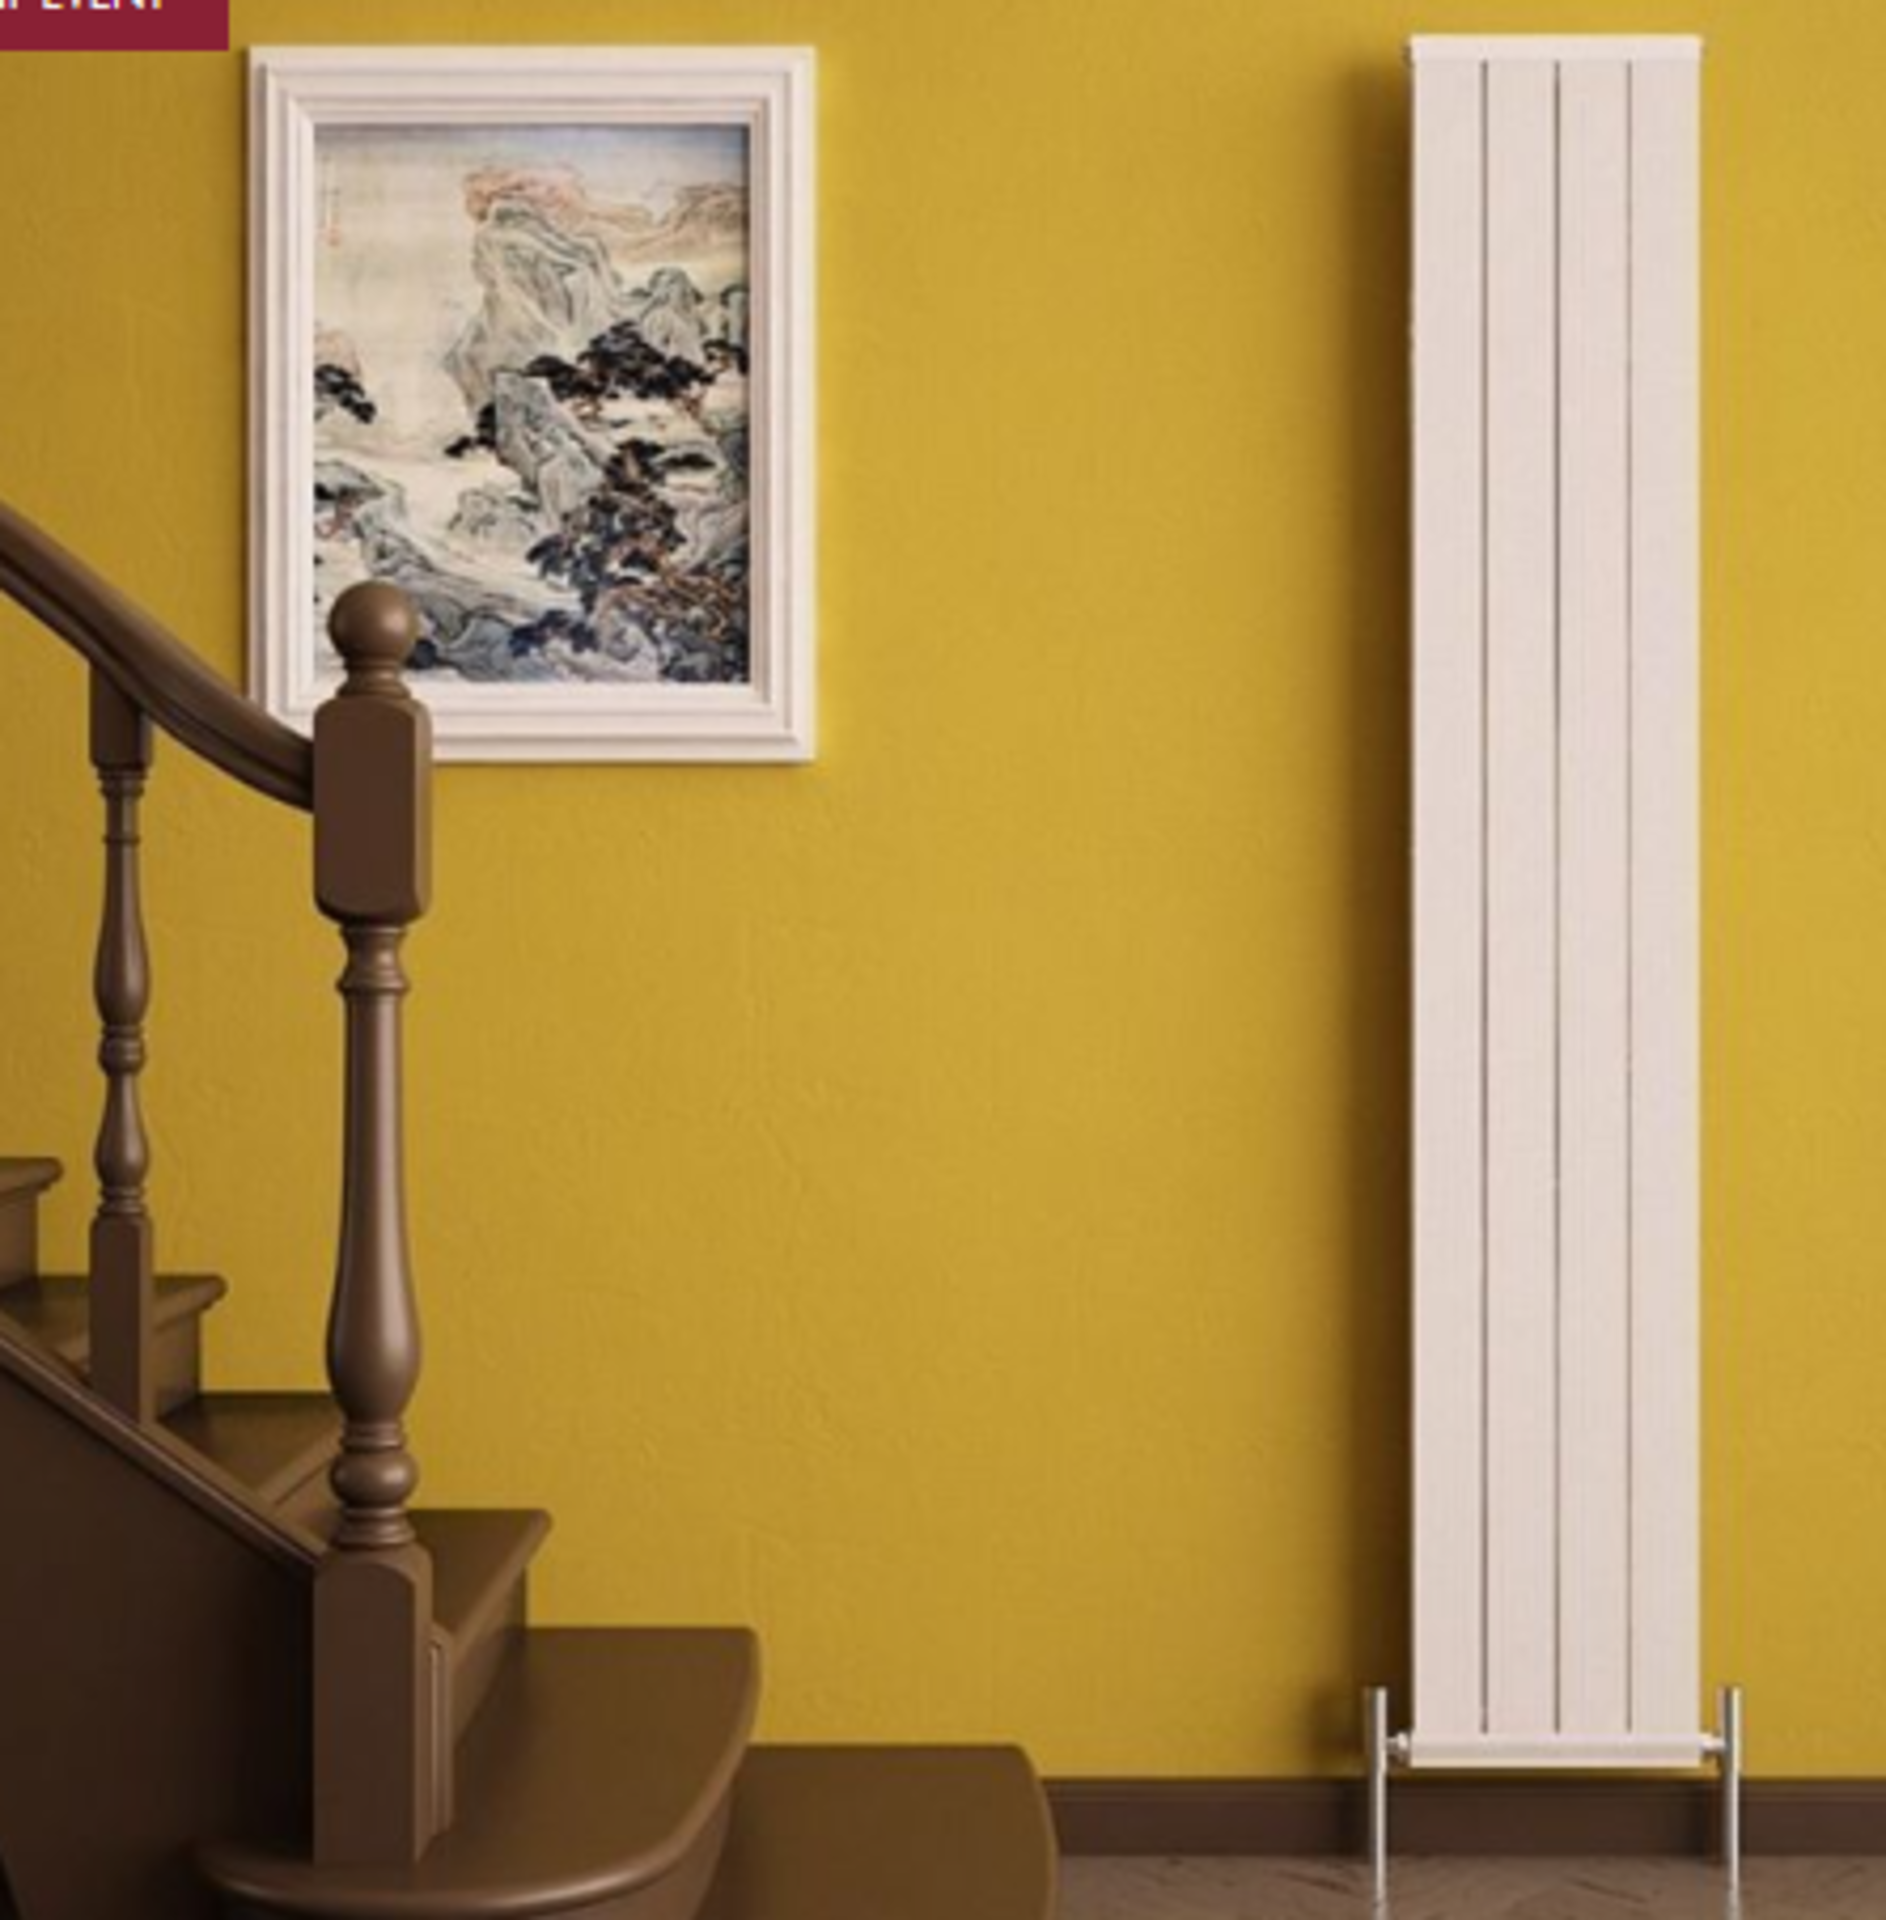 Carisa - Elite Tall Radiator - White - 1800x295mm - Looks In Good Condition & Boxed. - Image 2 of 2